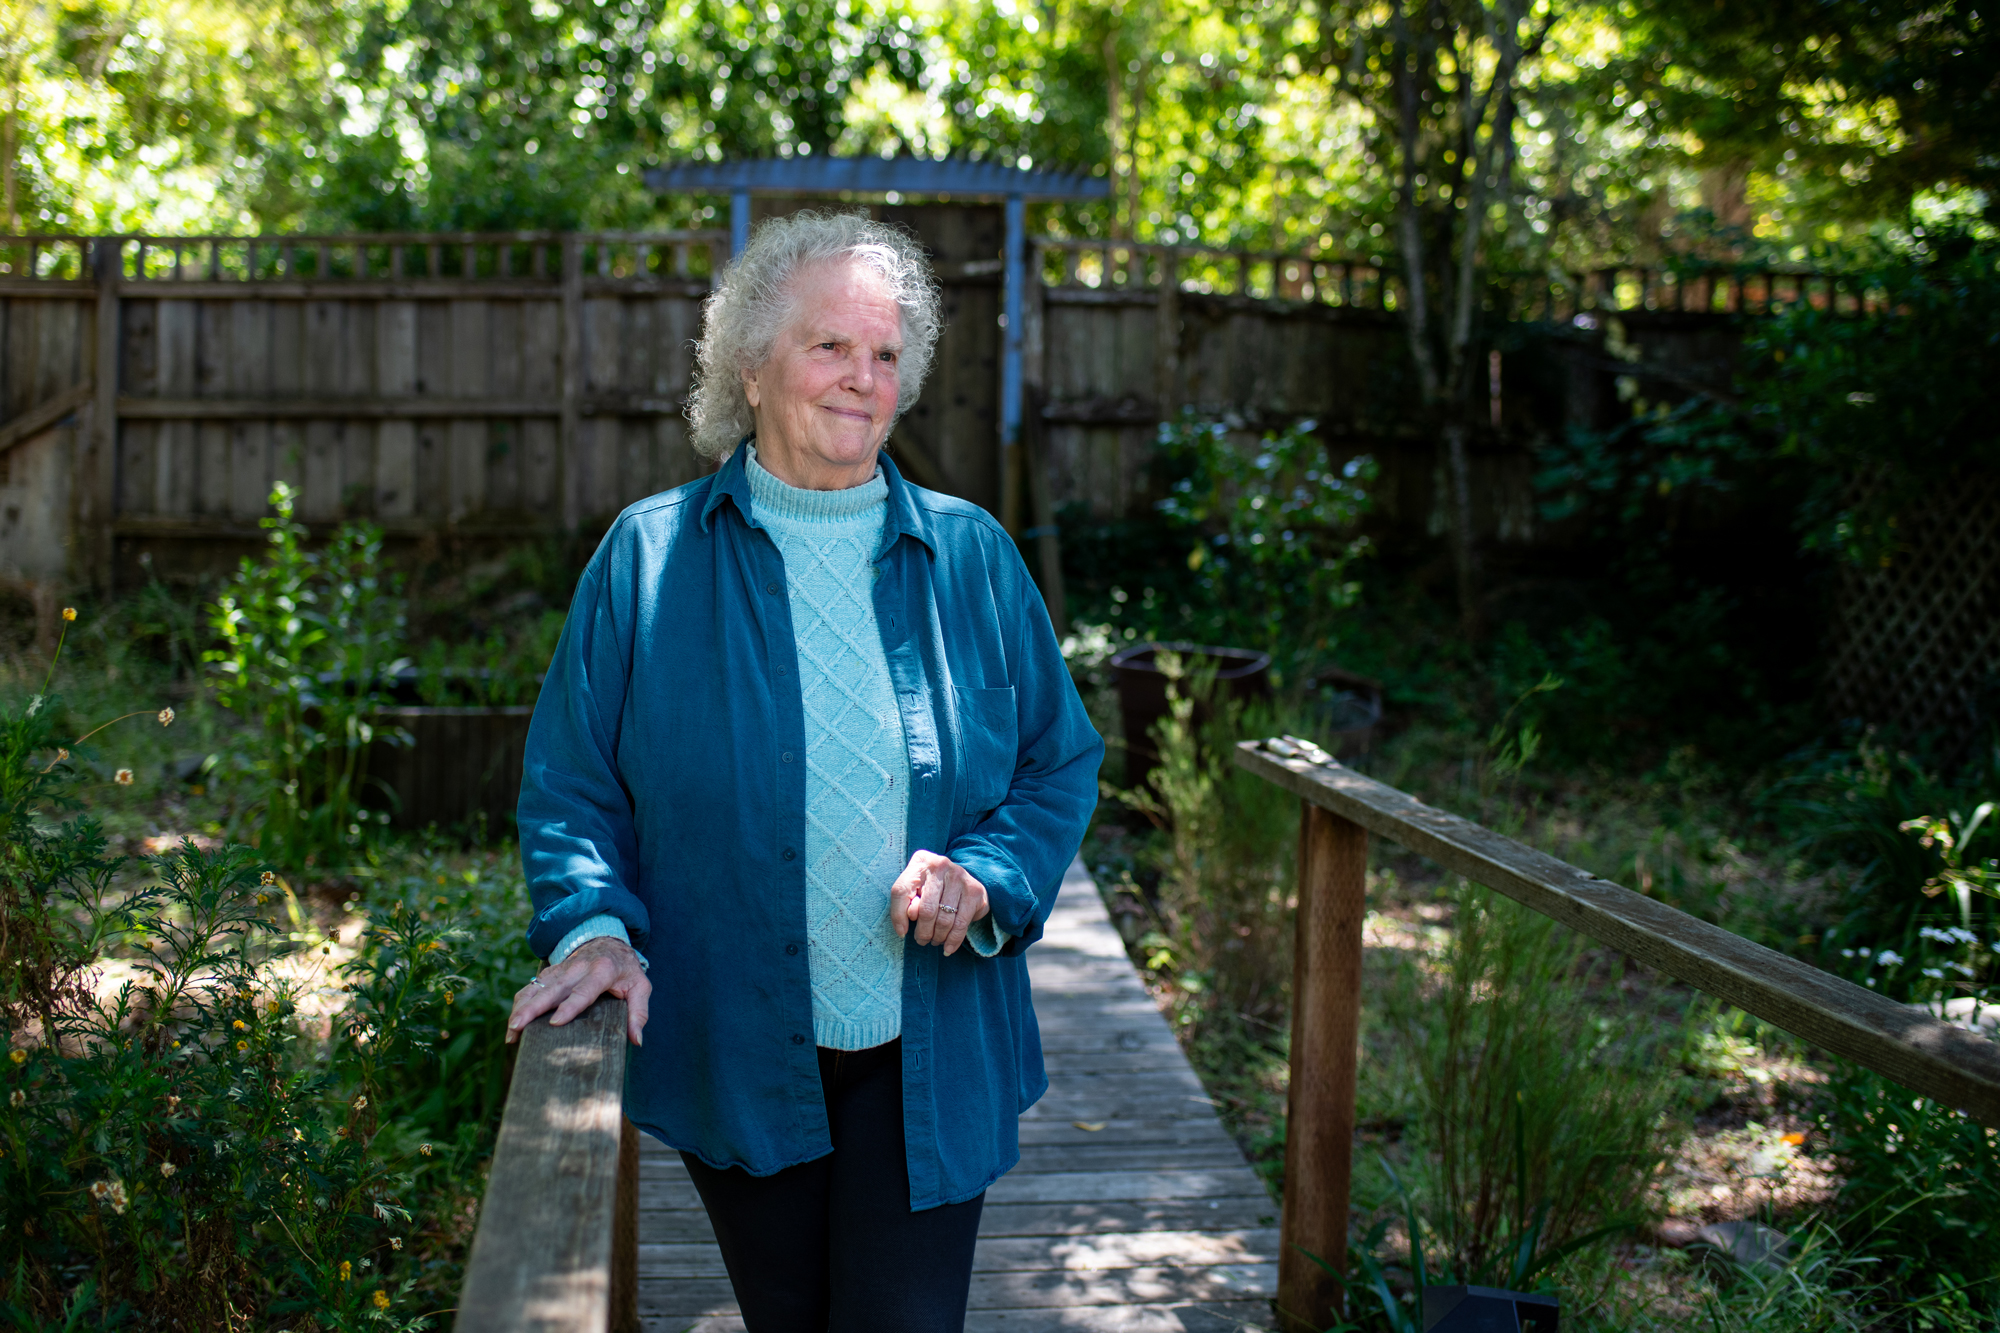 And older woman with short, curly gray hair smiles in leafy yard, one hand on wooden railing